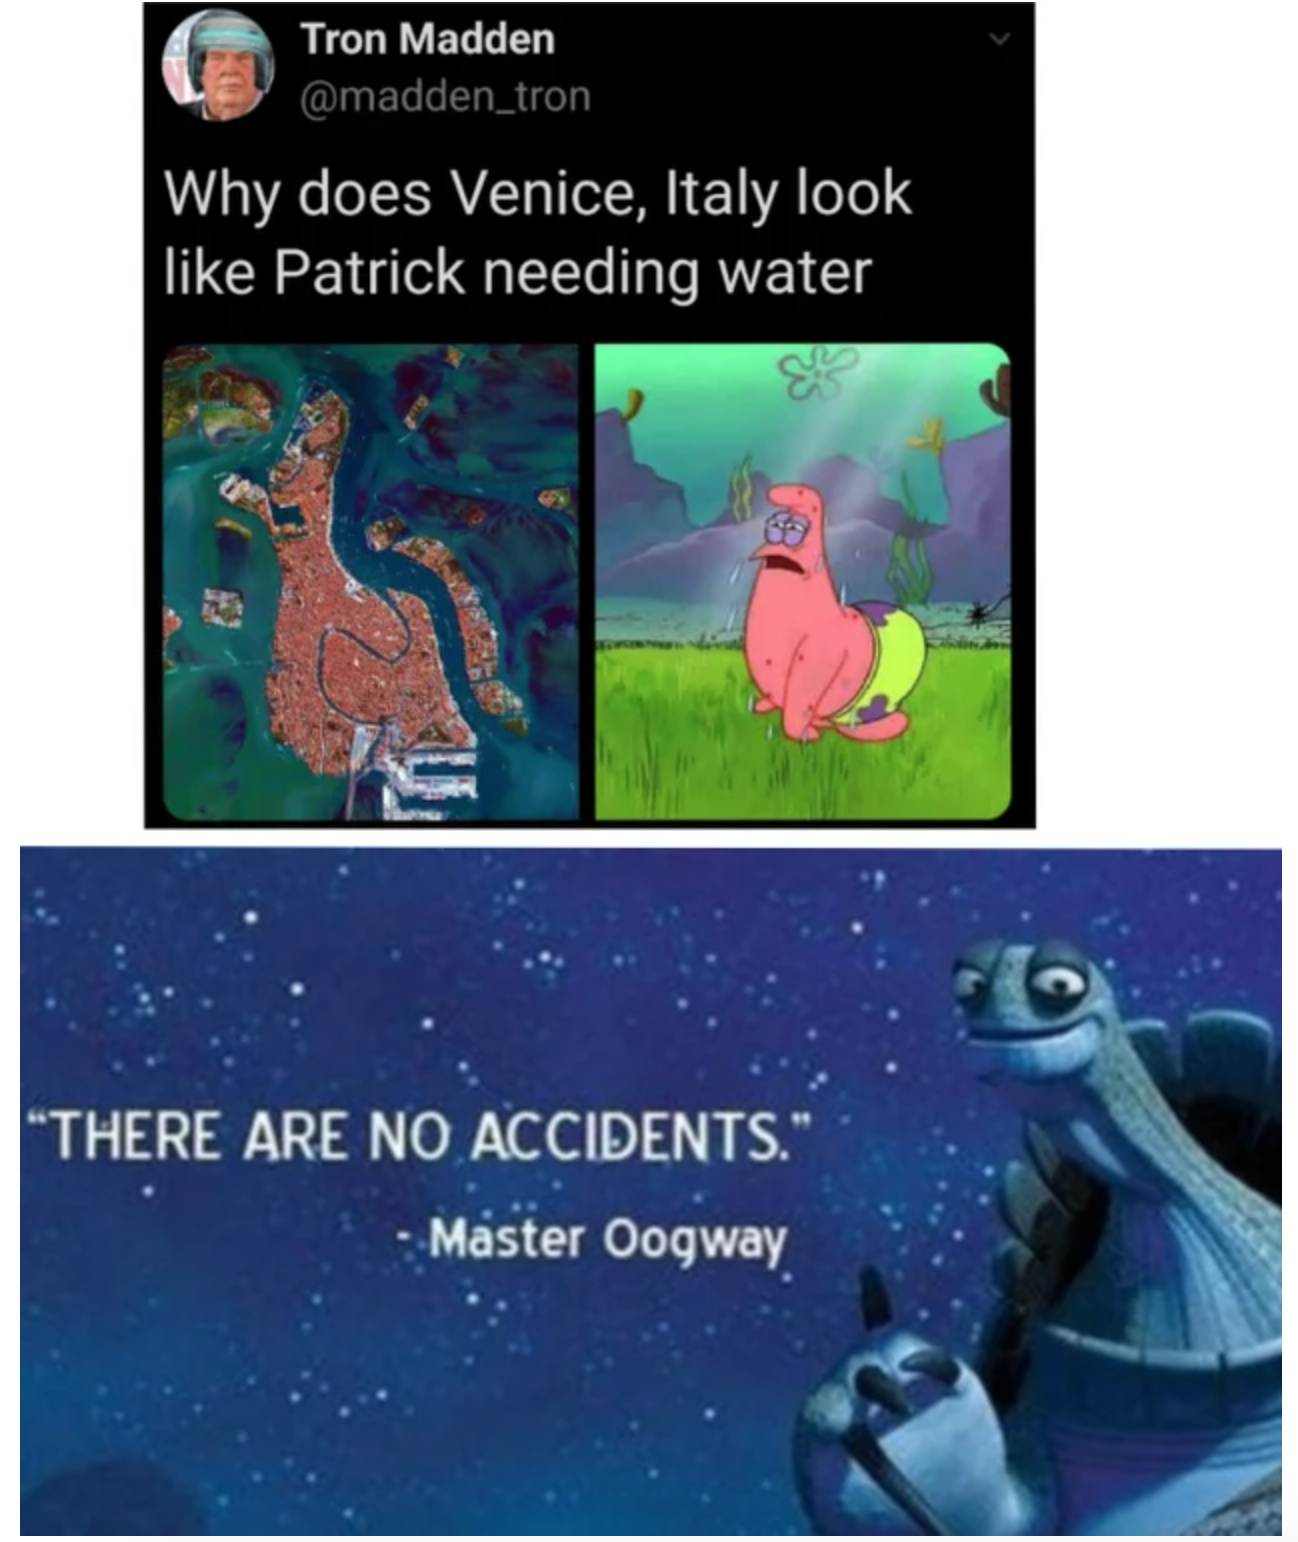 master oogway there are no accidents memes - Tron Madden Why does Venice, Italy look Patrick needing water "There Are No Accidents. Master Oogway